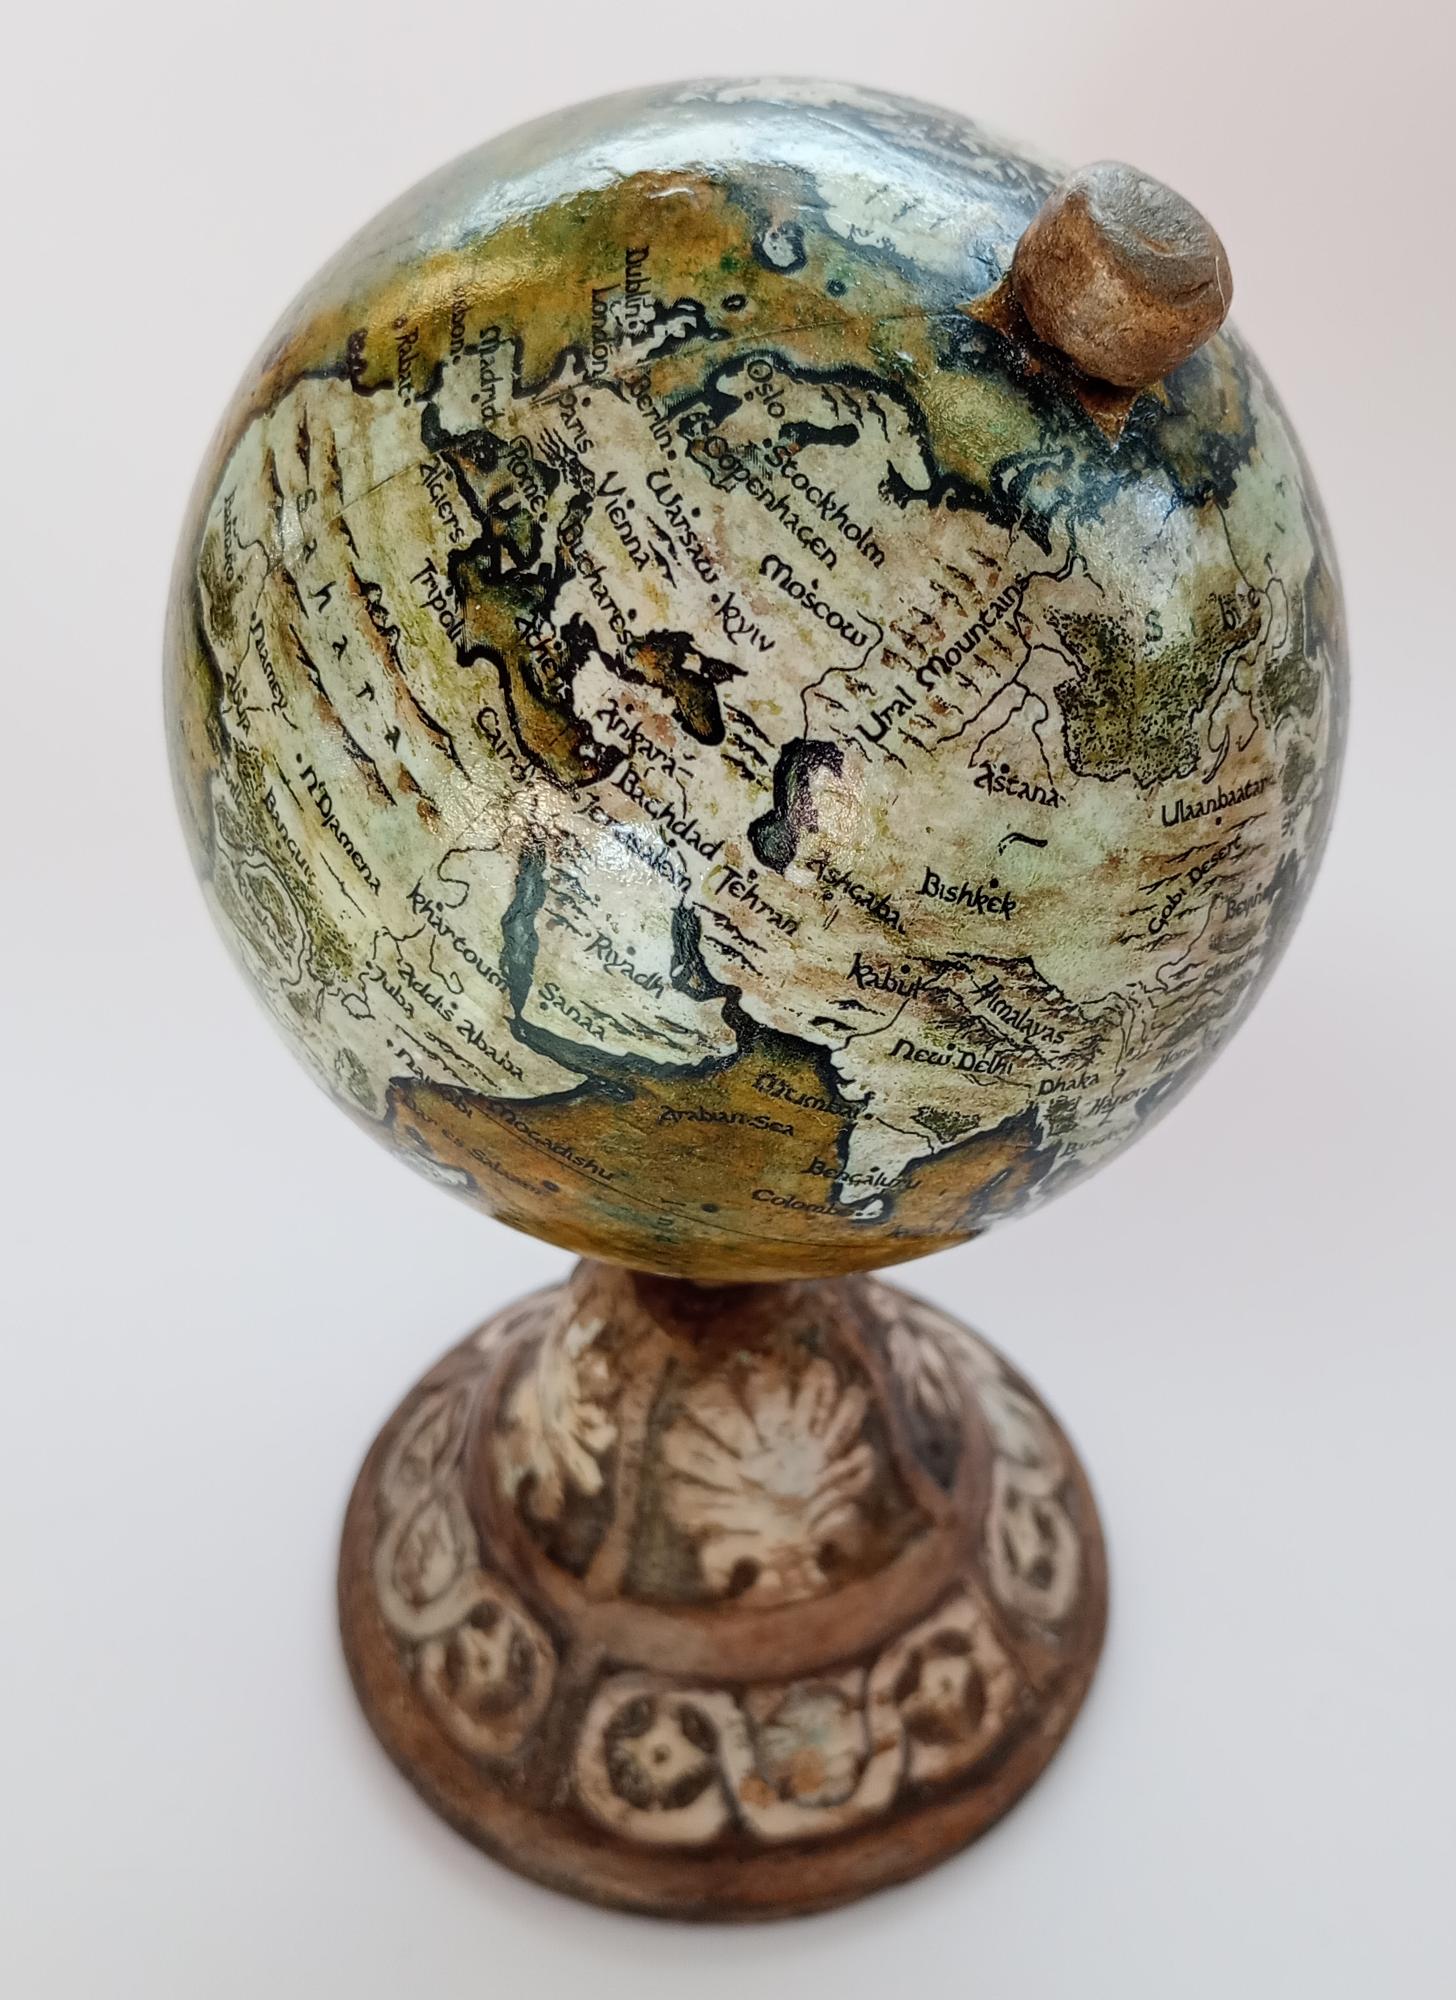 I made this epic inspired mini globe that turns real into a Christmas baulbe